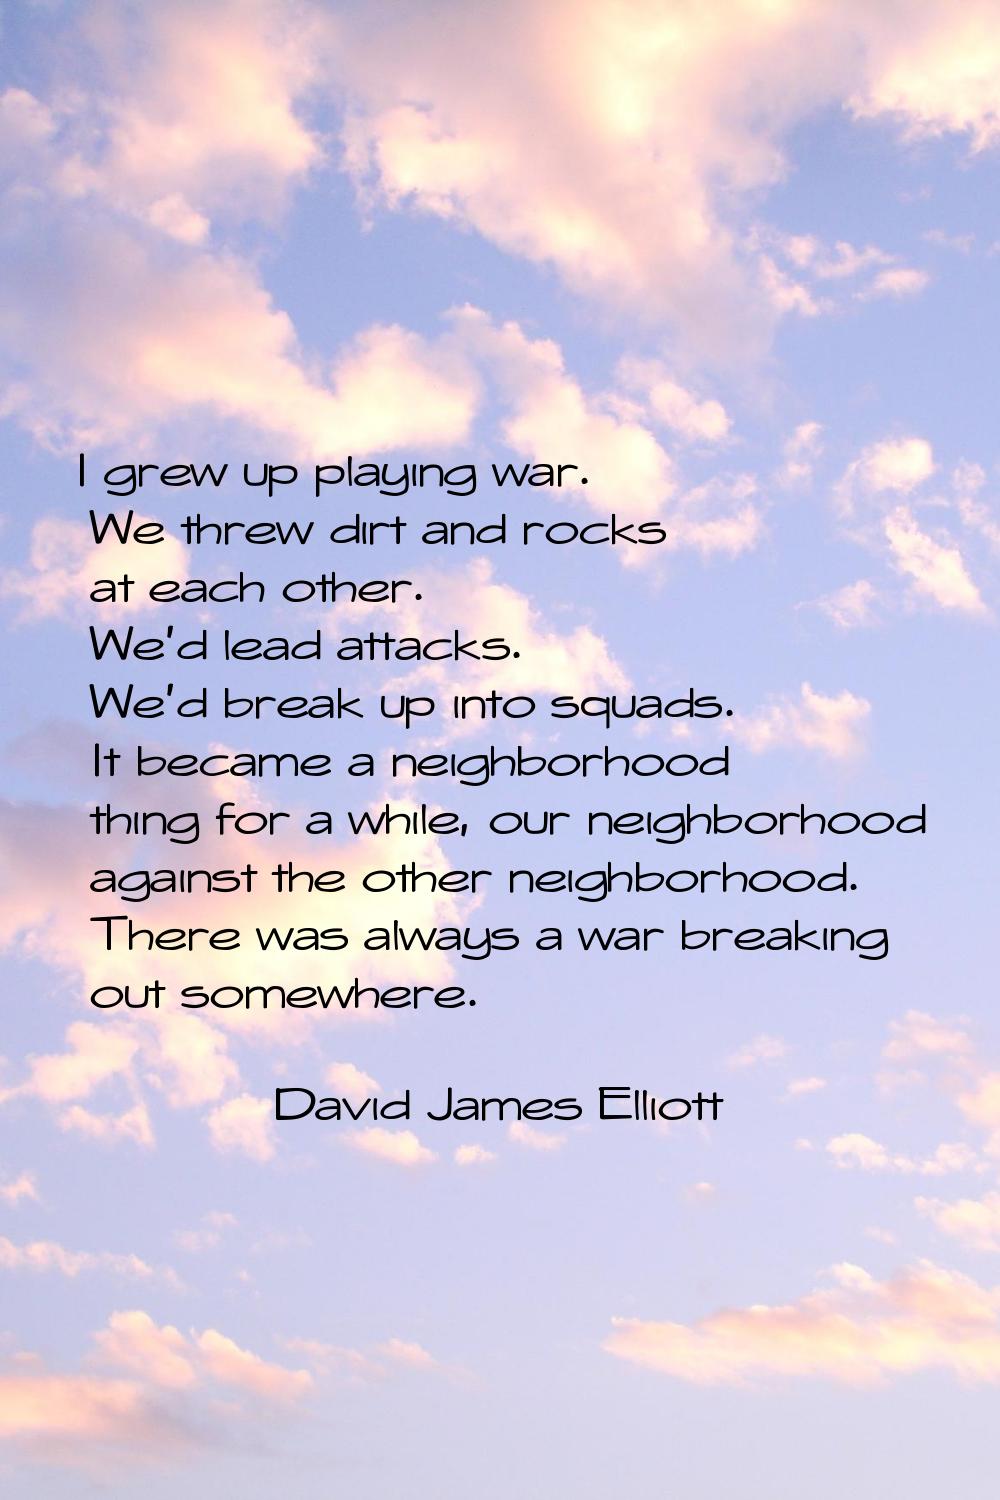 I grew up playing war. We threw dirt and rocks at each other. We'd lead attacks. We'd break up into